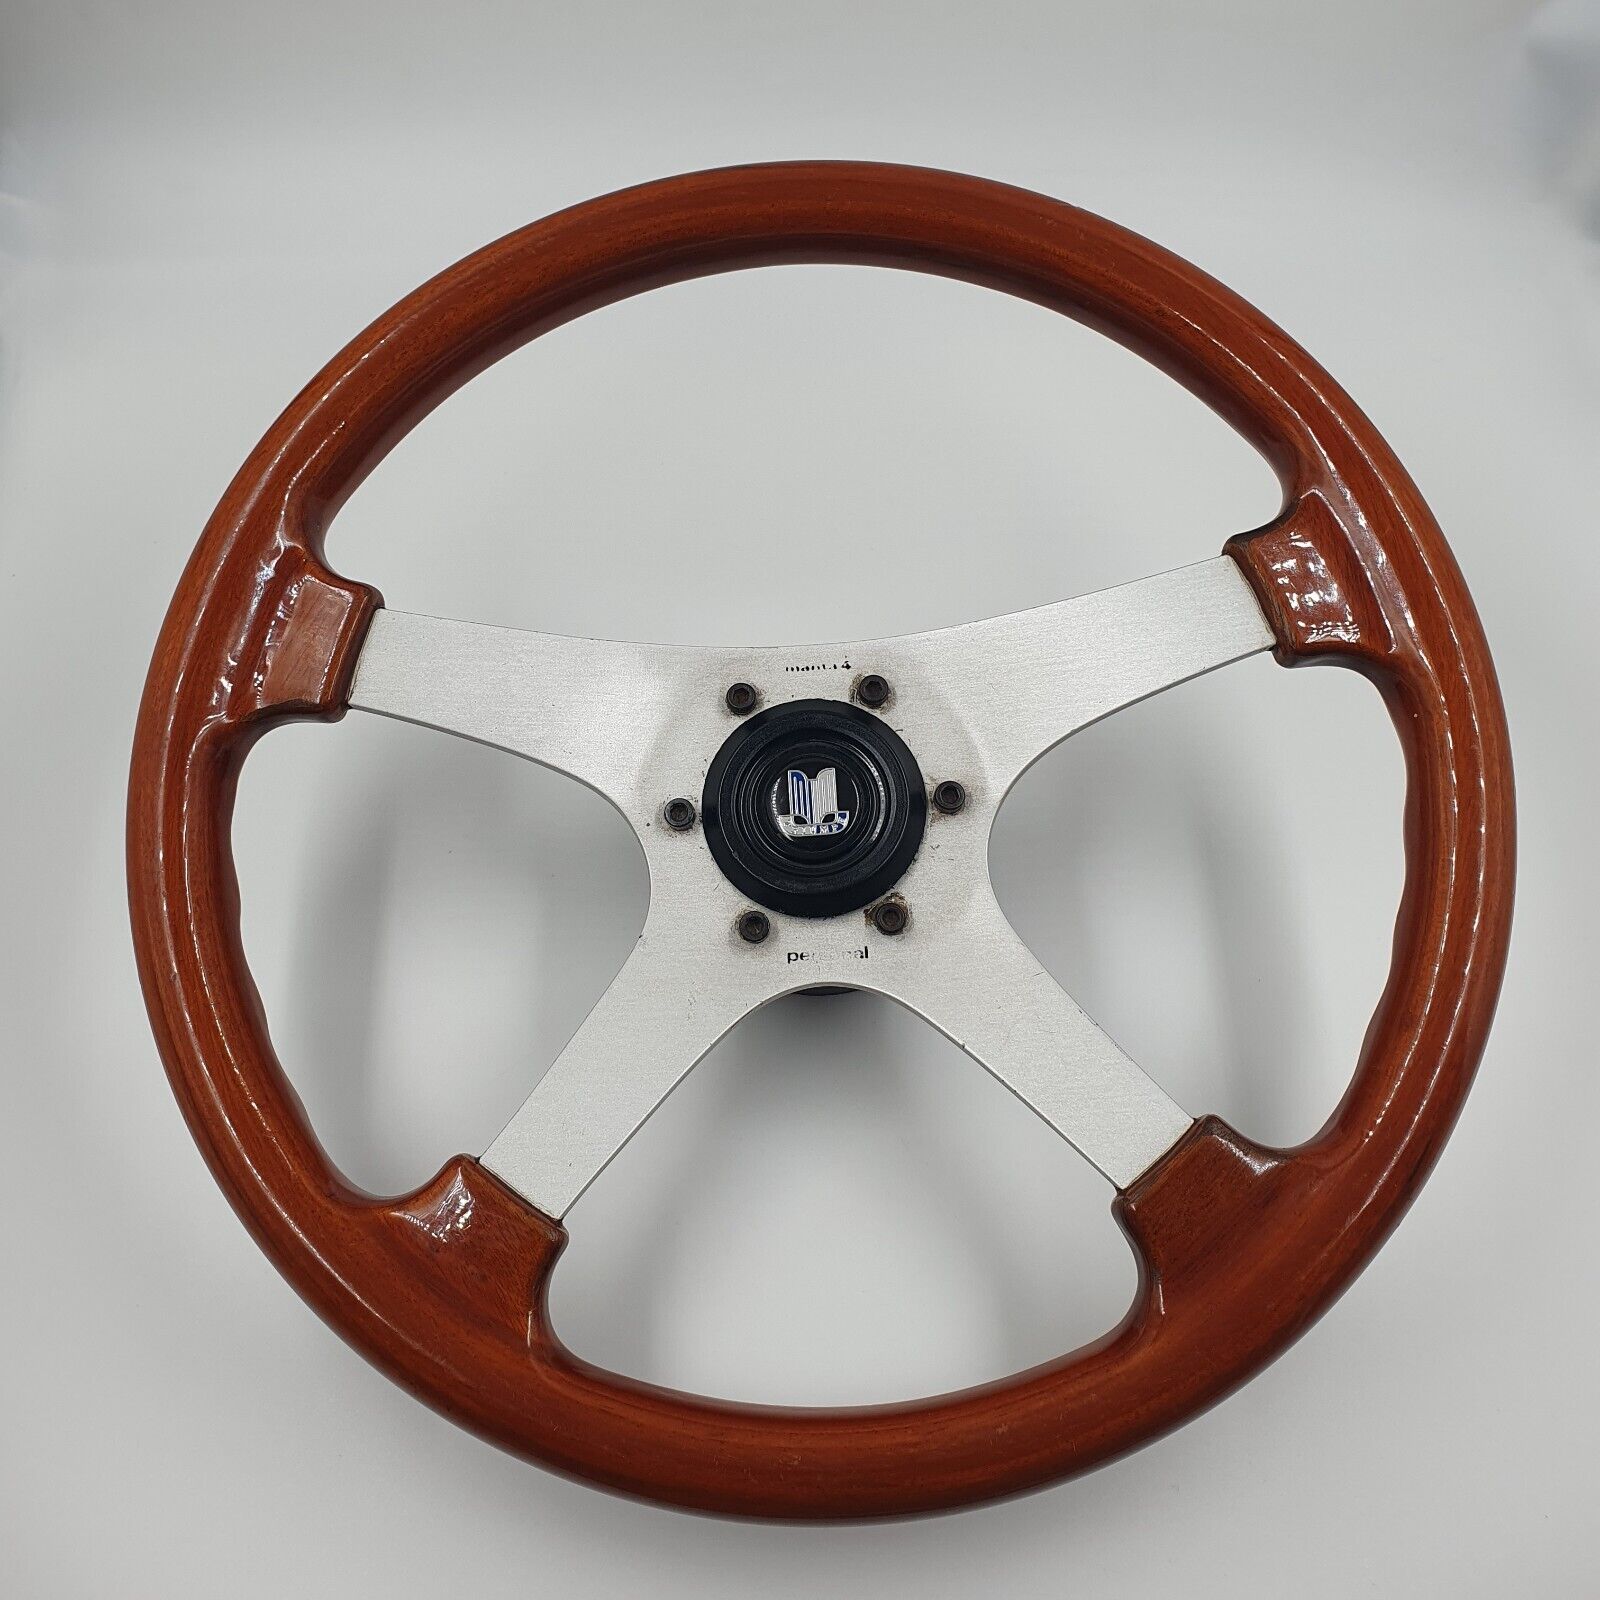 Rare Vintage Personal Manta 4 Wooden Steering Wheel 350m, Sports Rally Cars